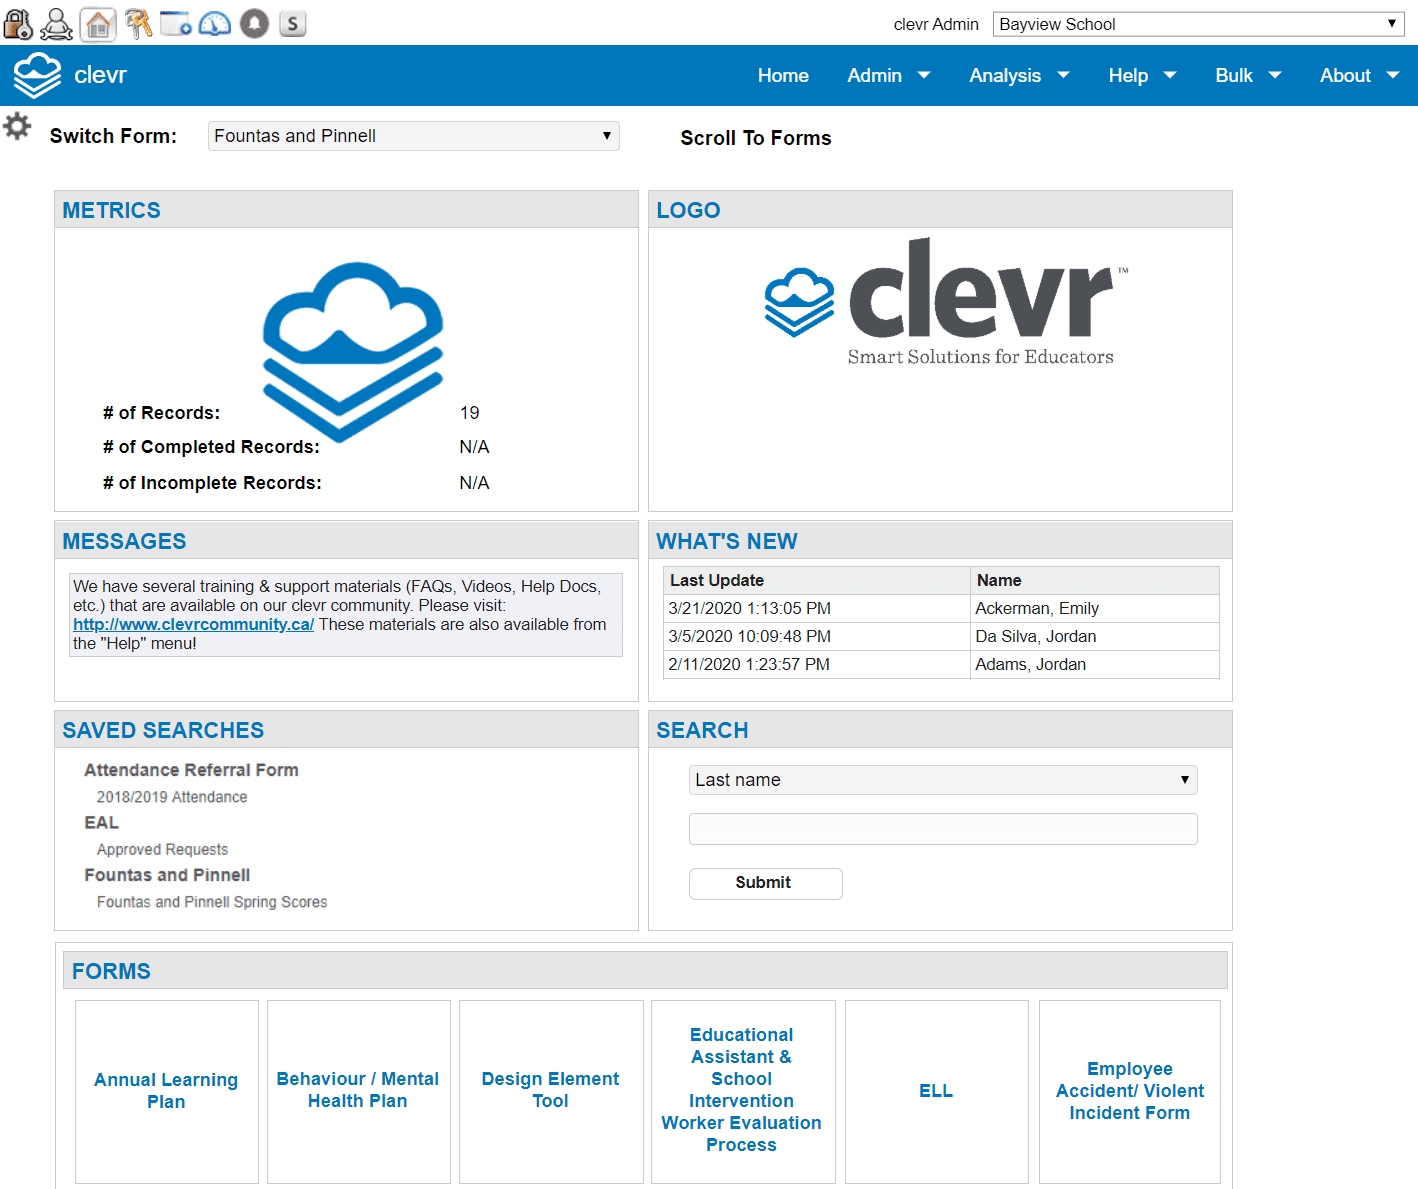 clevr data sharing platform interactive dashboard with all the sections showing